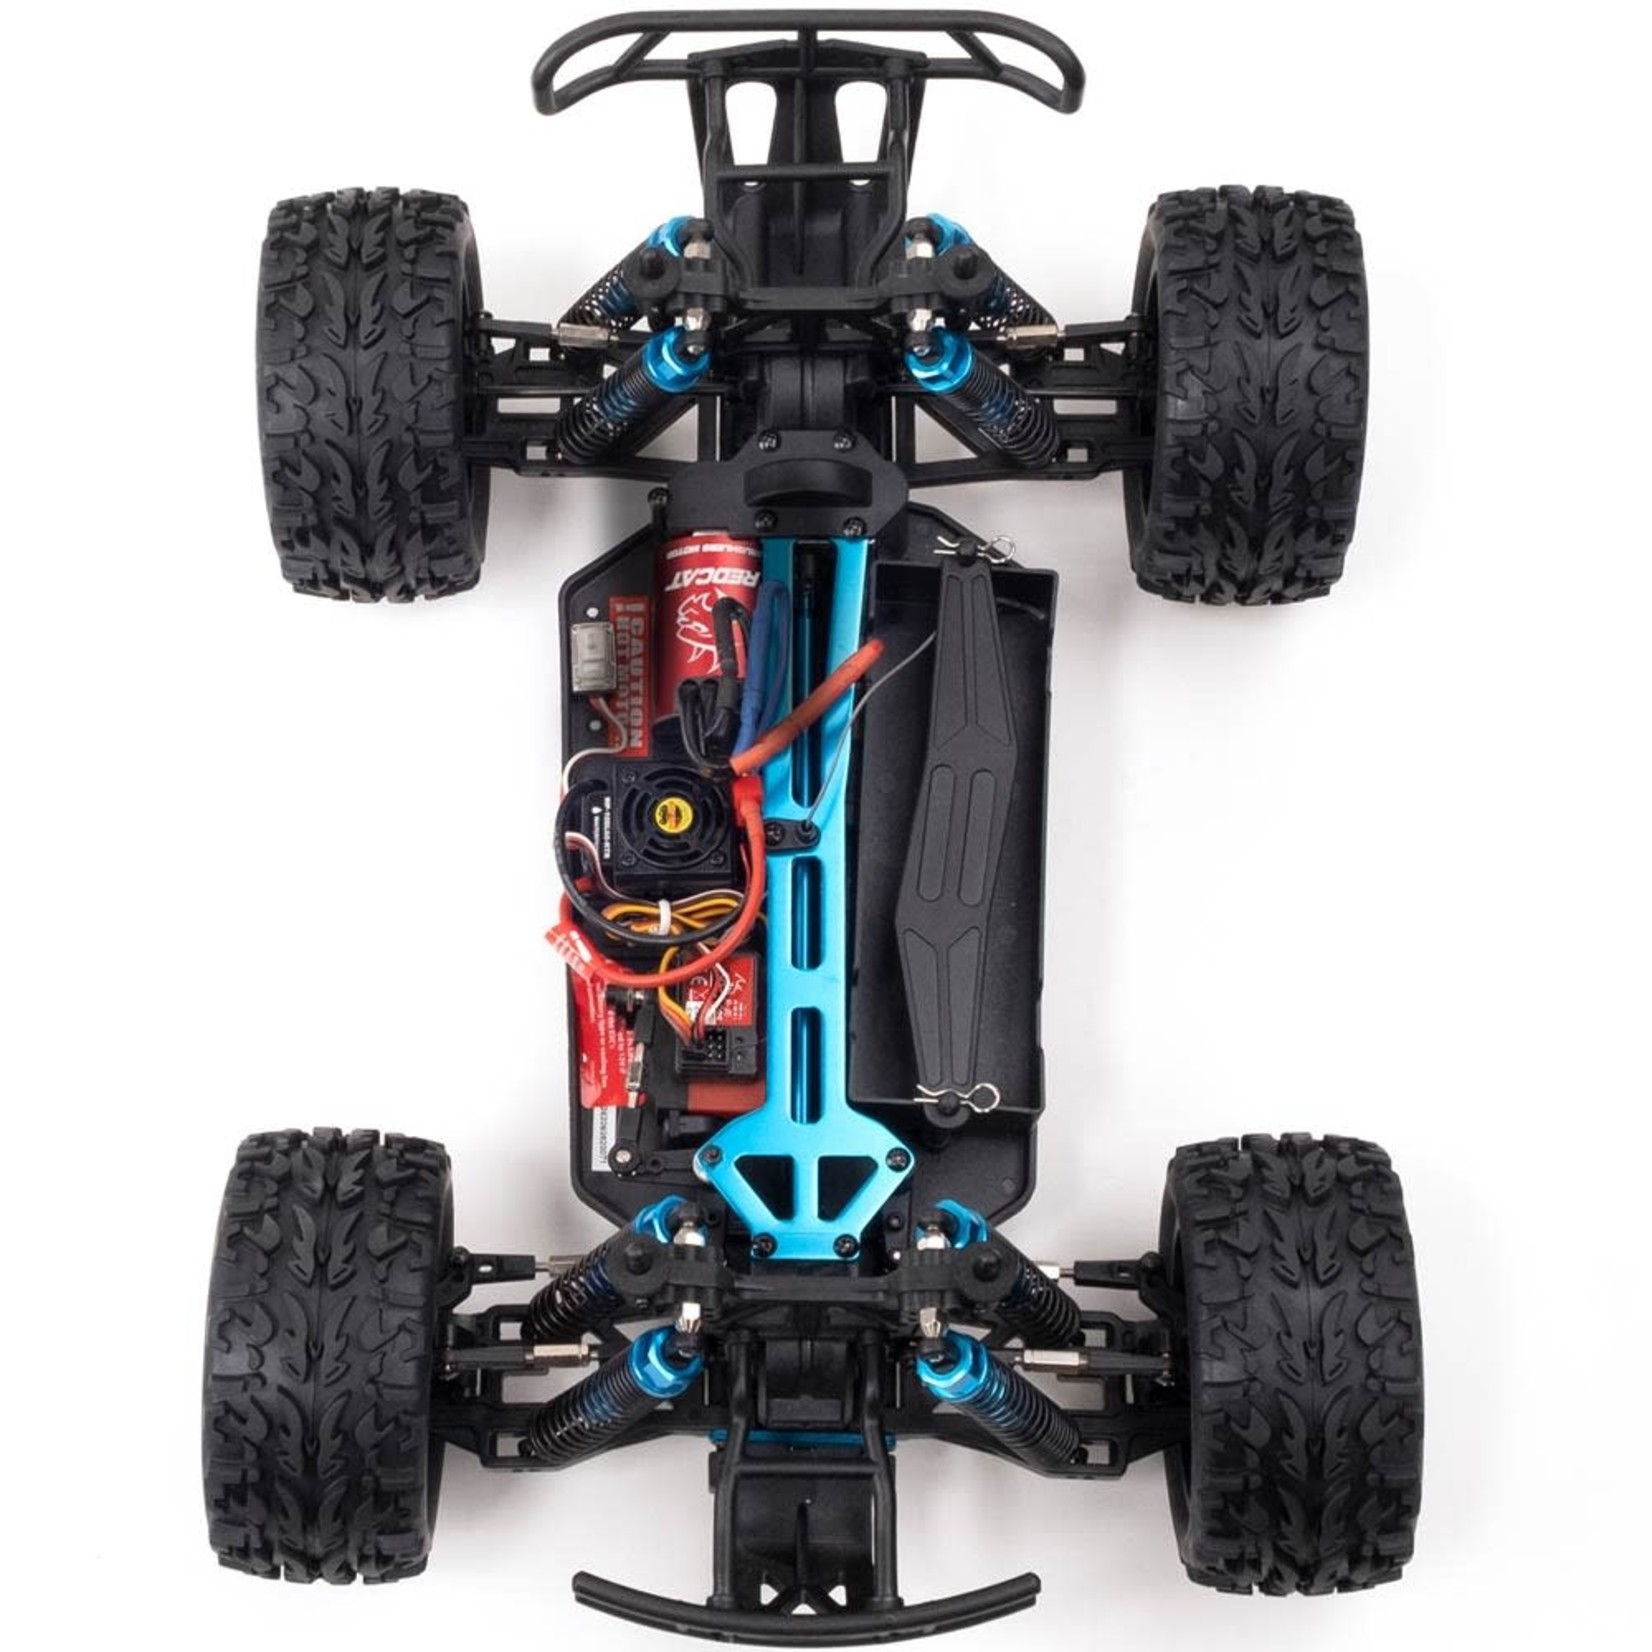 REDCAT Volcano EPX PRO  Copper Truck 1/10 Scale Brushless Electric  No battery No charger